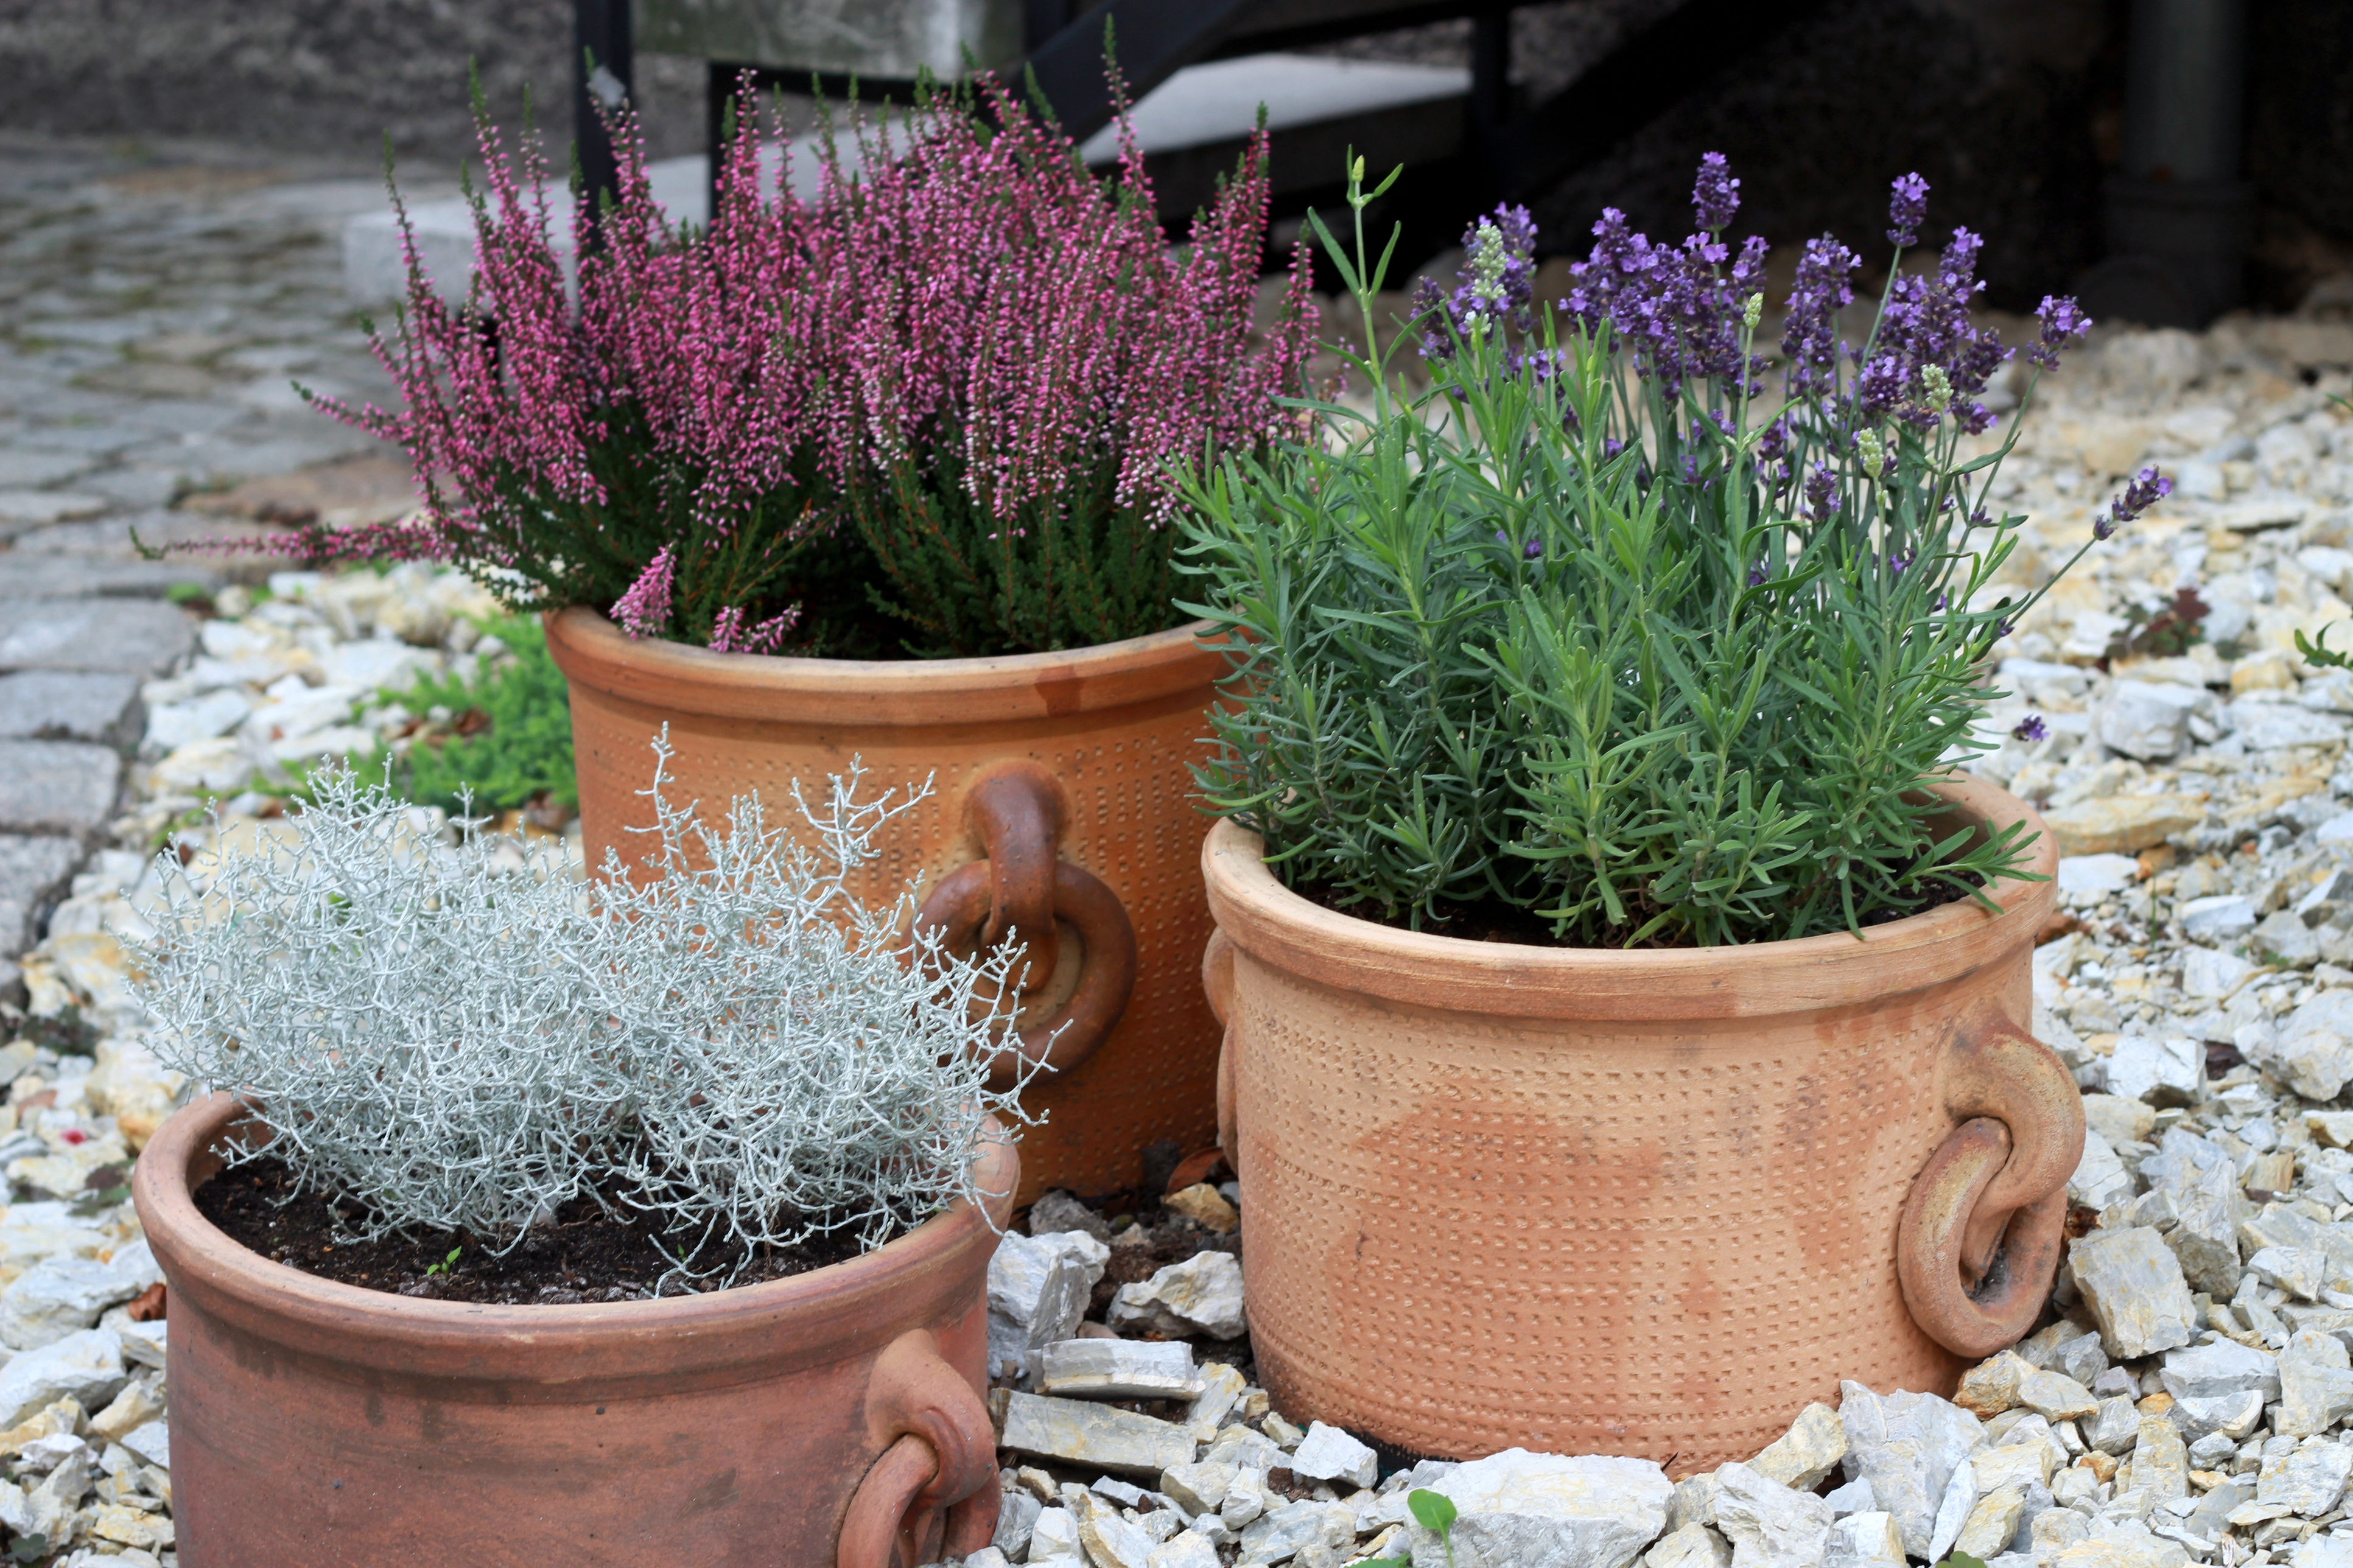 Pots in gravel to encourage them to root (Thinkstock/PA)